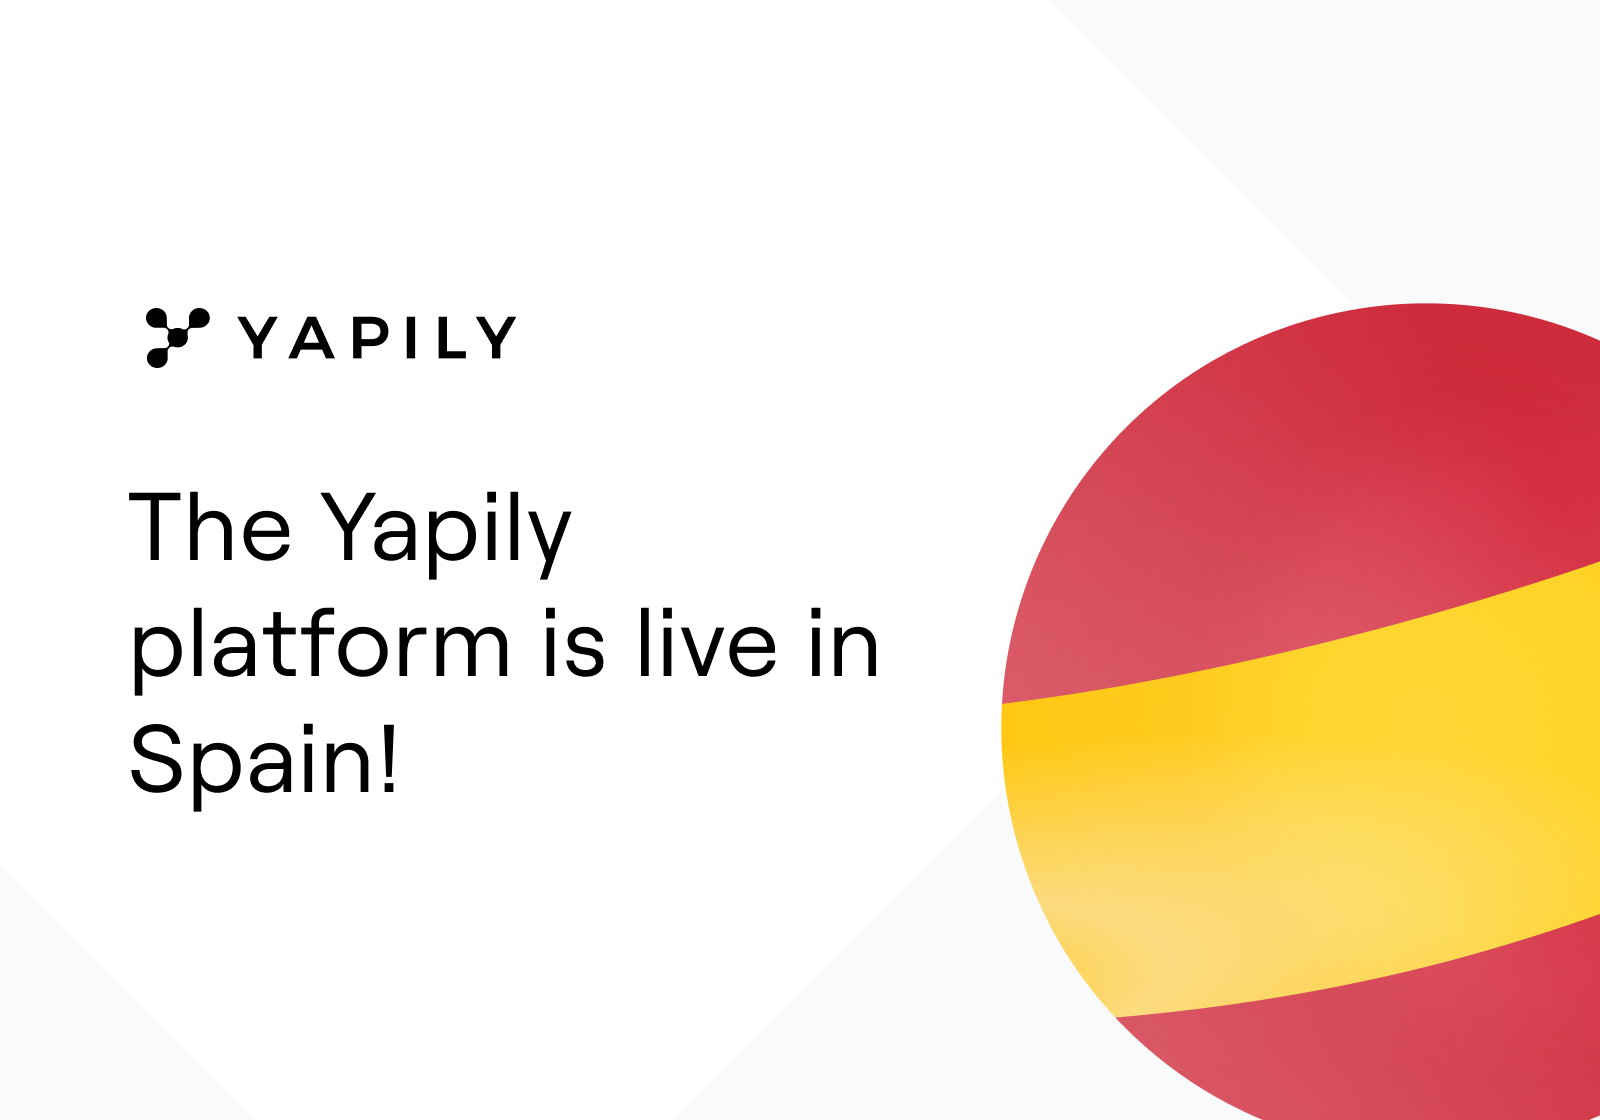 We’re pleased to announce that our Open Banking API is now available for fintechs and businesses to access consumer accounts in Spain, providing seamless and secure access to financial data.